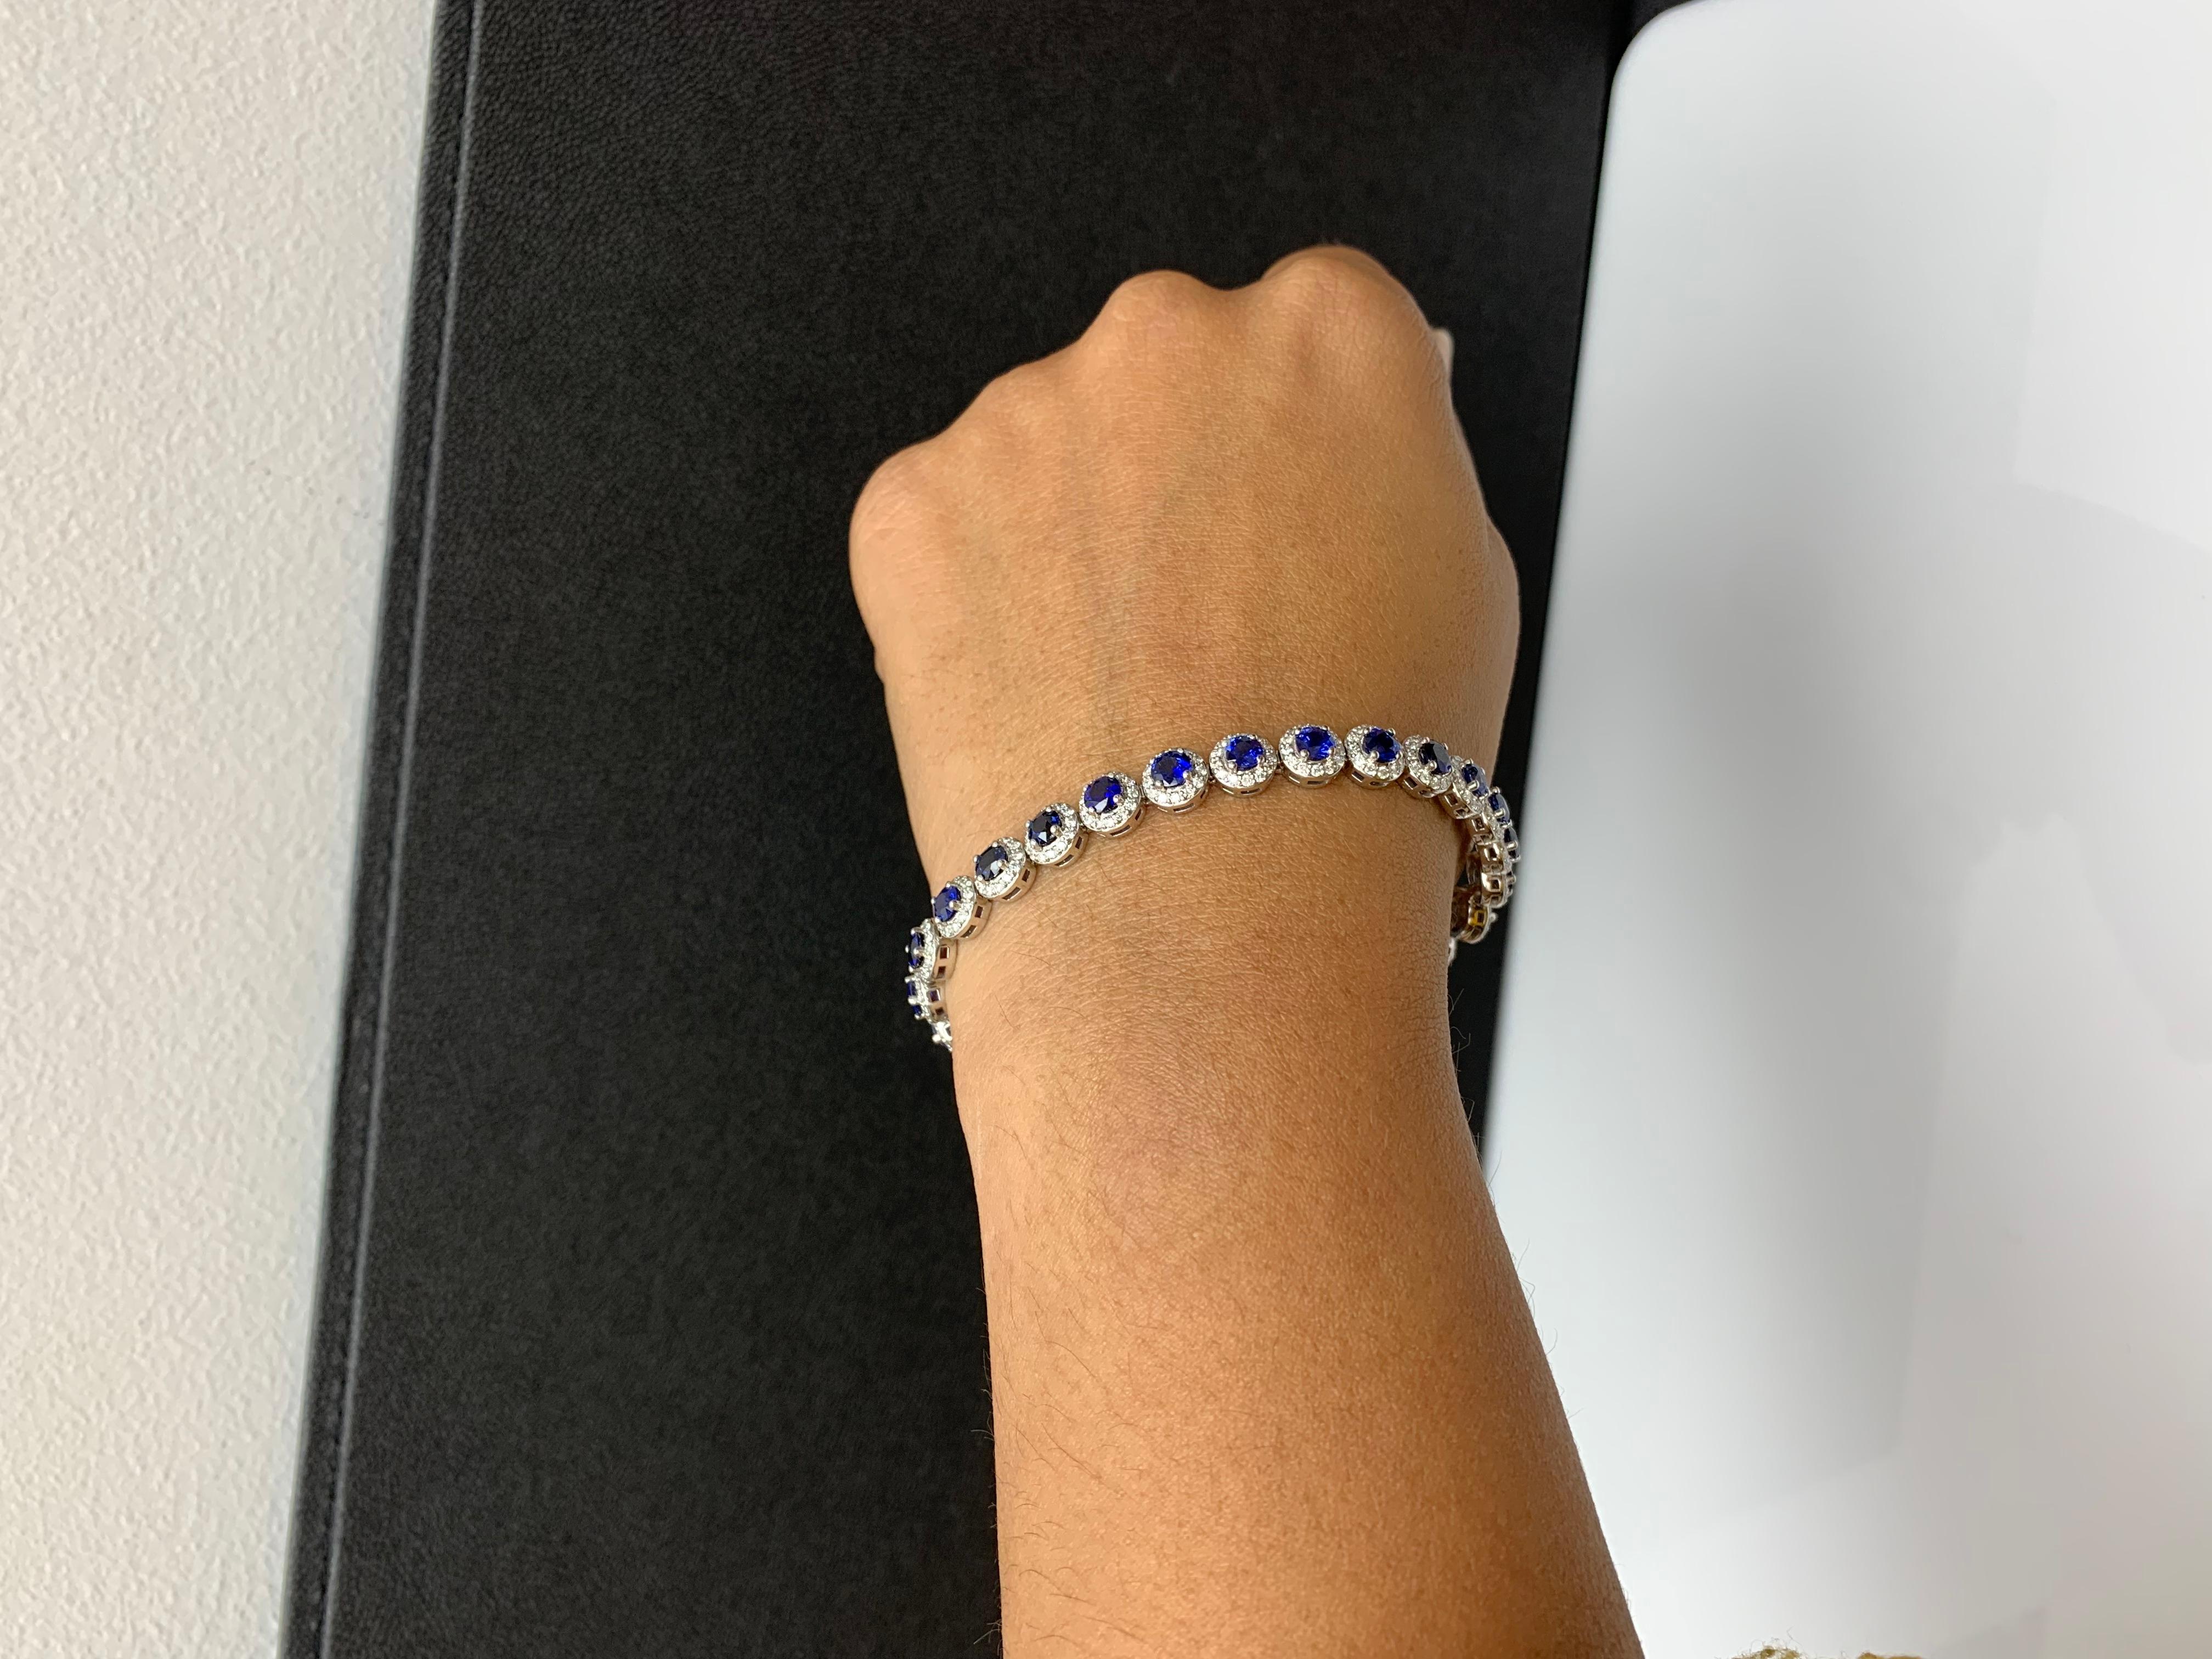 7.47 Carat Blue Sapphire and Diamond Halo Tennis Bracelet in 14k White Gold For Sale 1